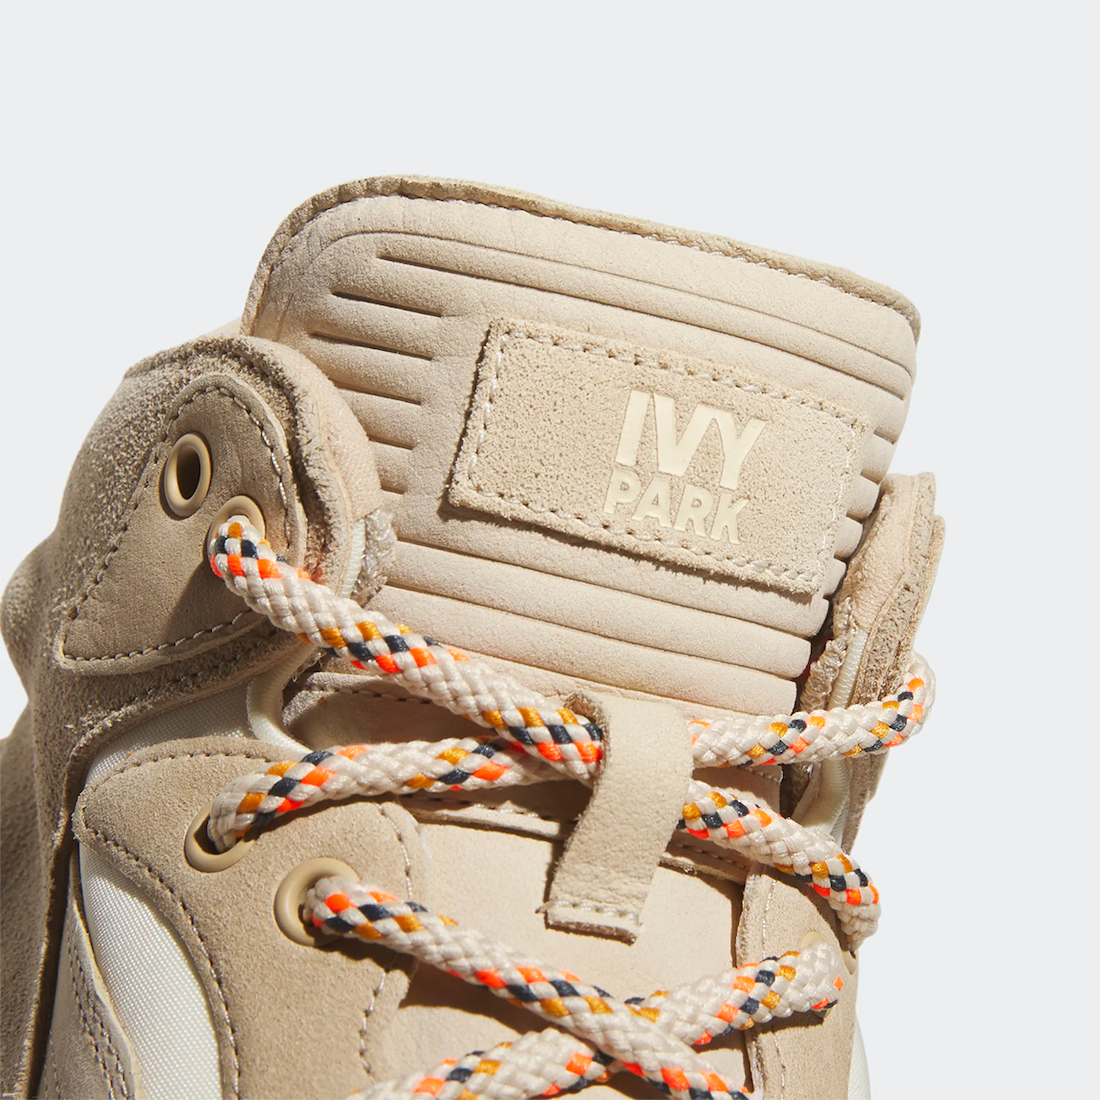 IVY PARK adidas Top Ten 2000 ID5107 Release Date Tongue